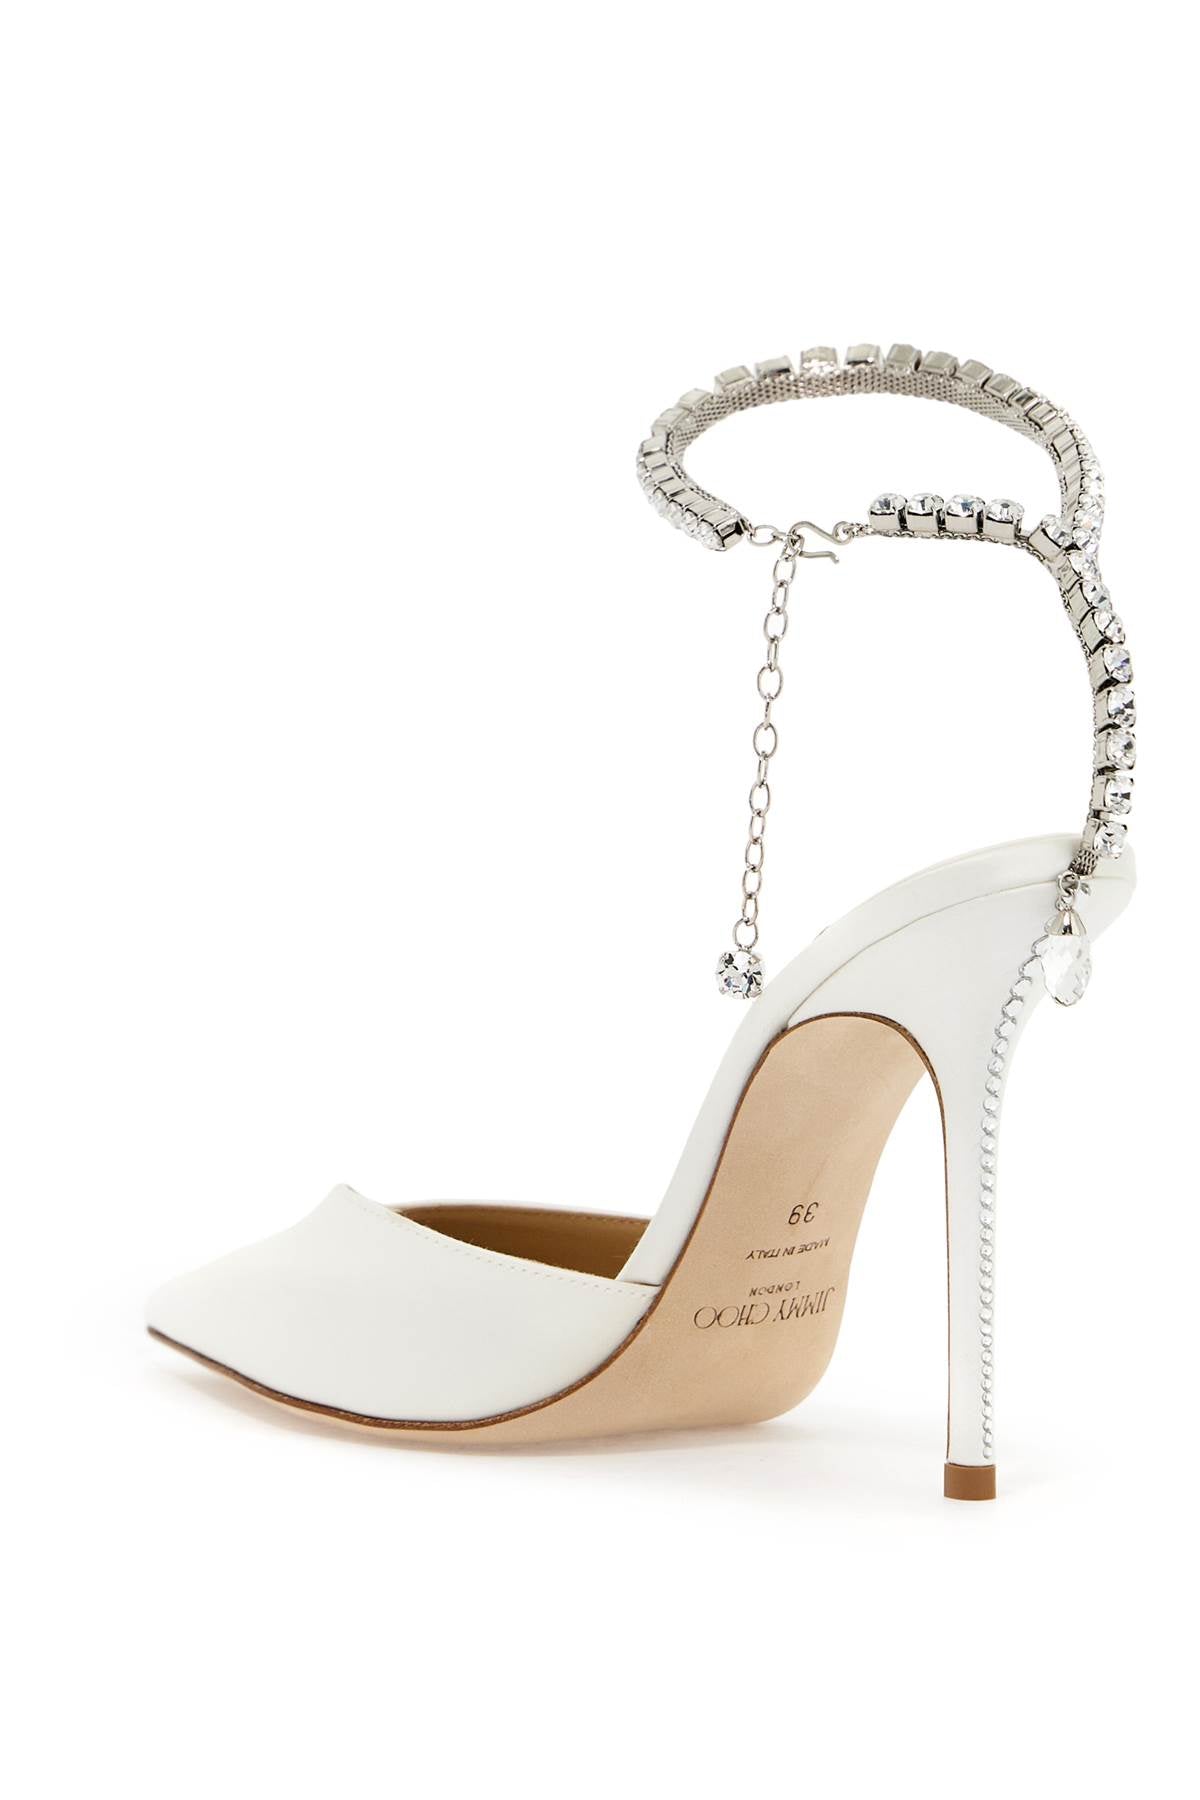 JIMMY CHOO White Satin Pumps with Crystal Ankle Strap and Rhinestone Stiletto Heel